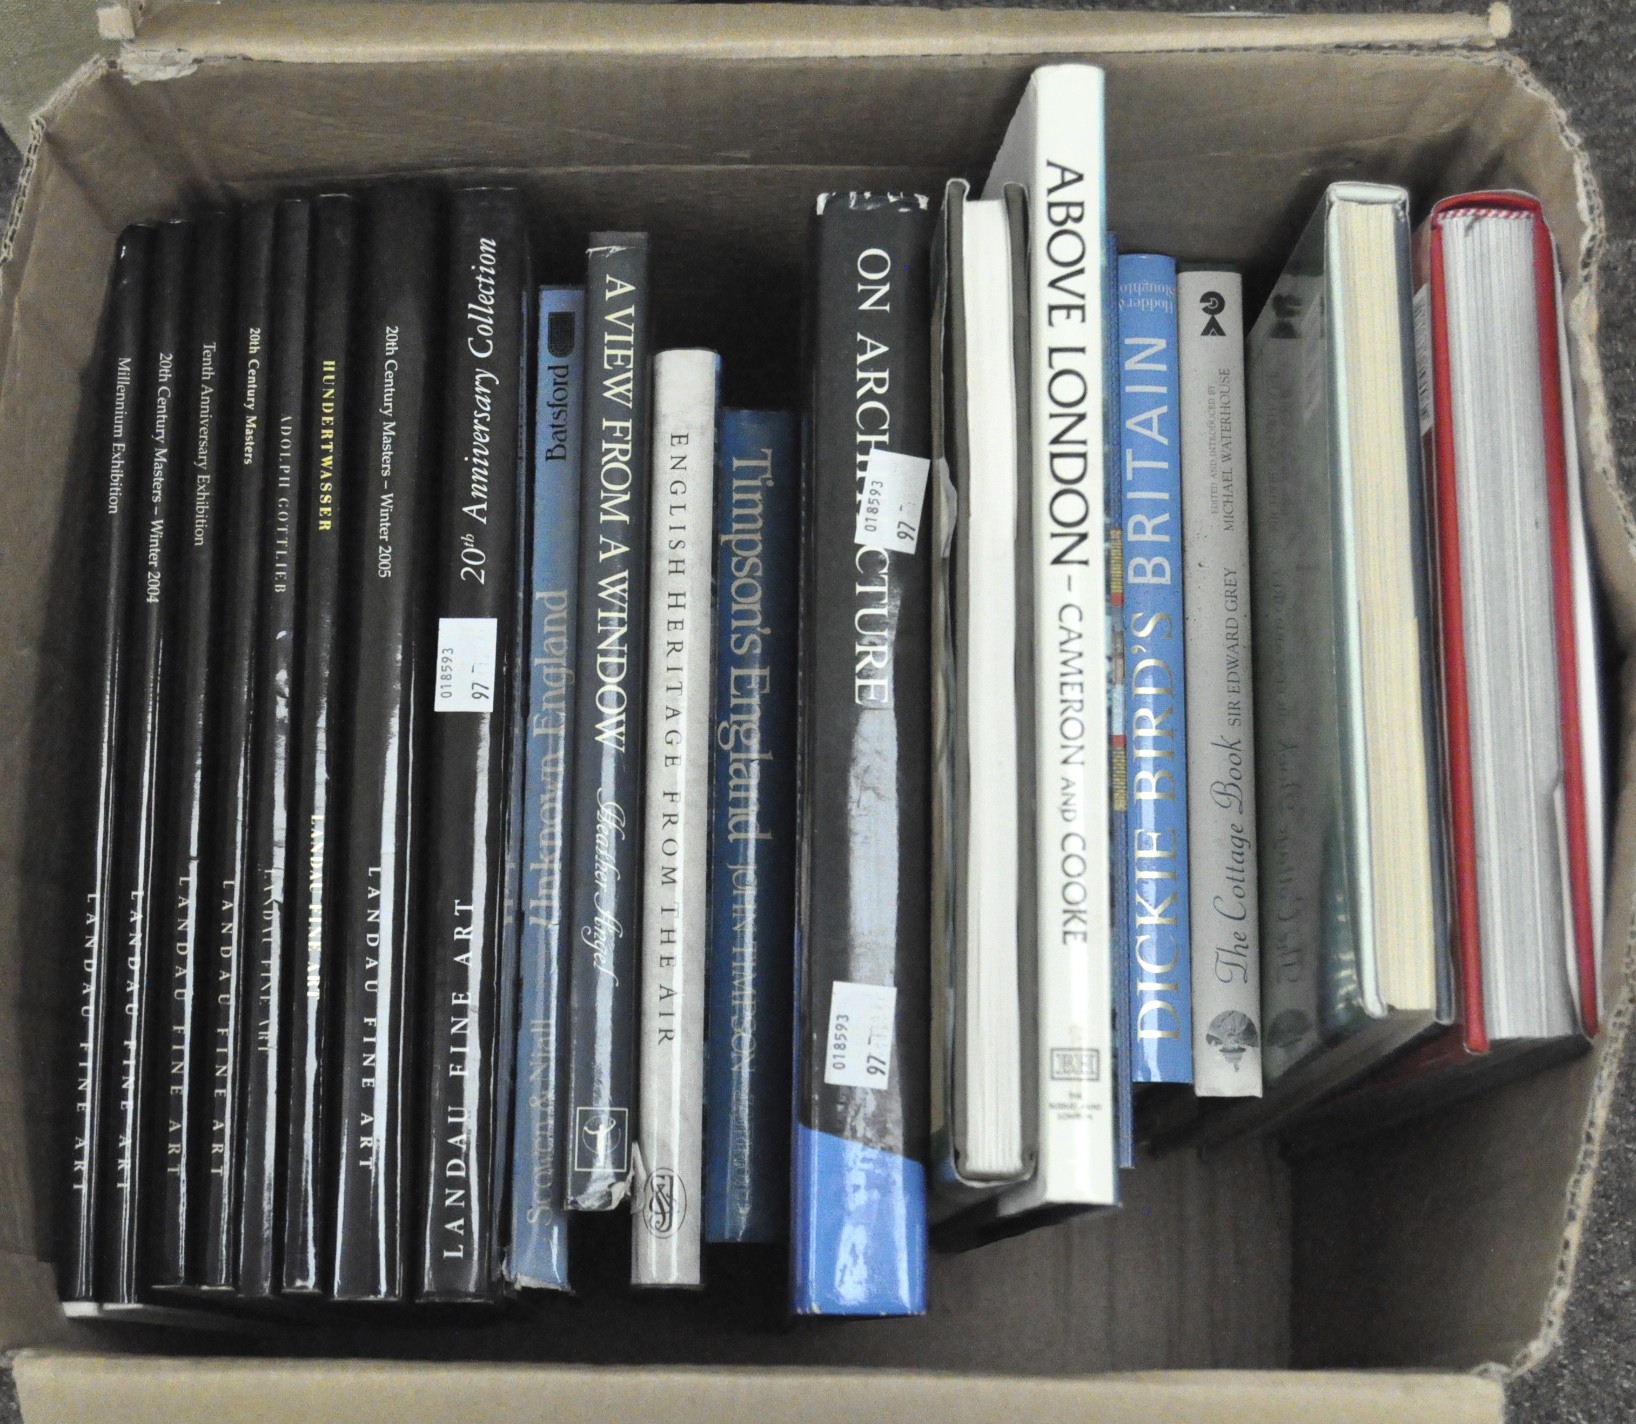 A collection of art and architecture reference books,